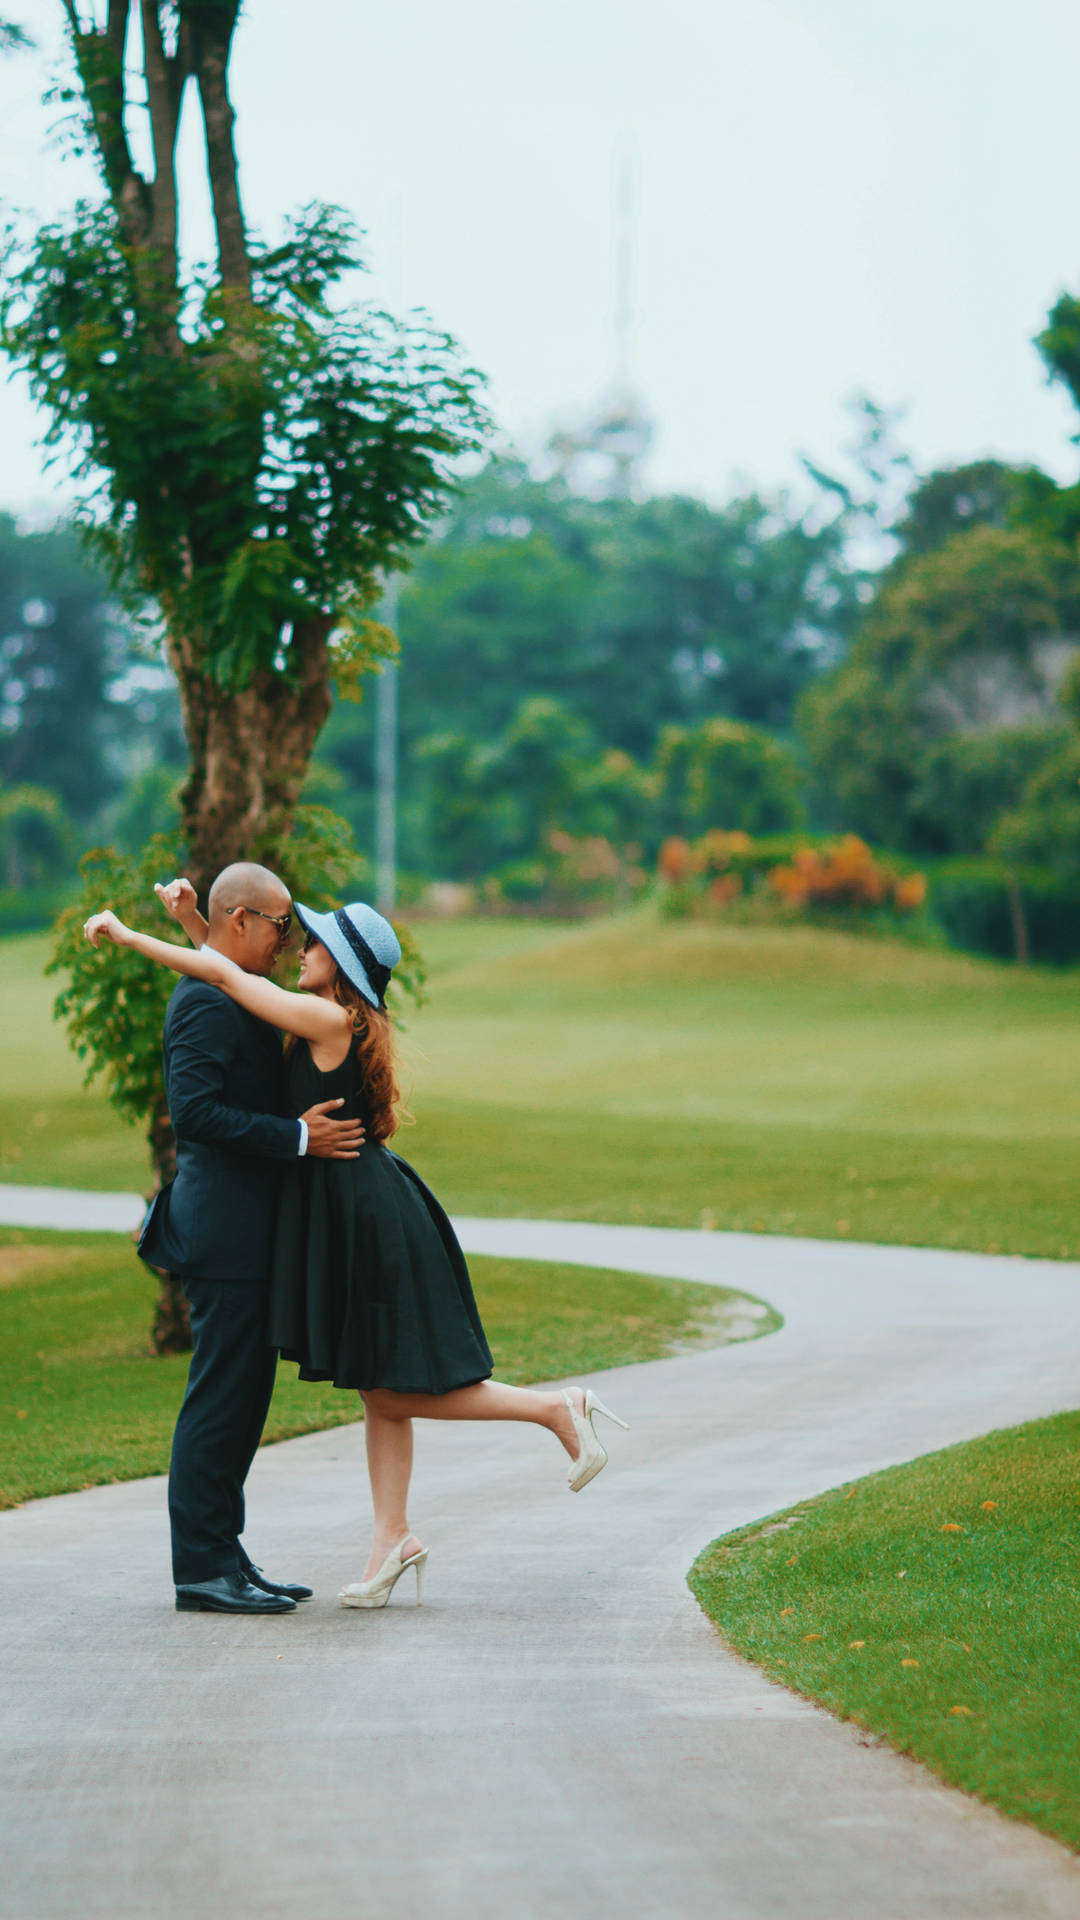 Couple On Golf Course Road